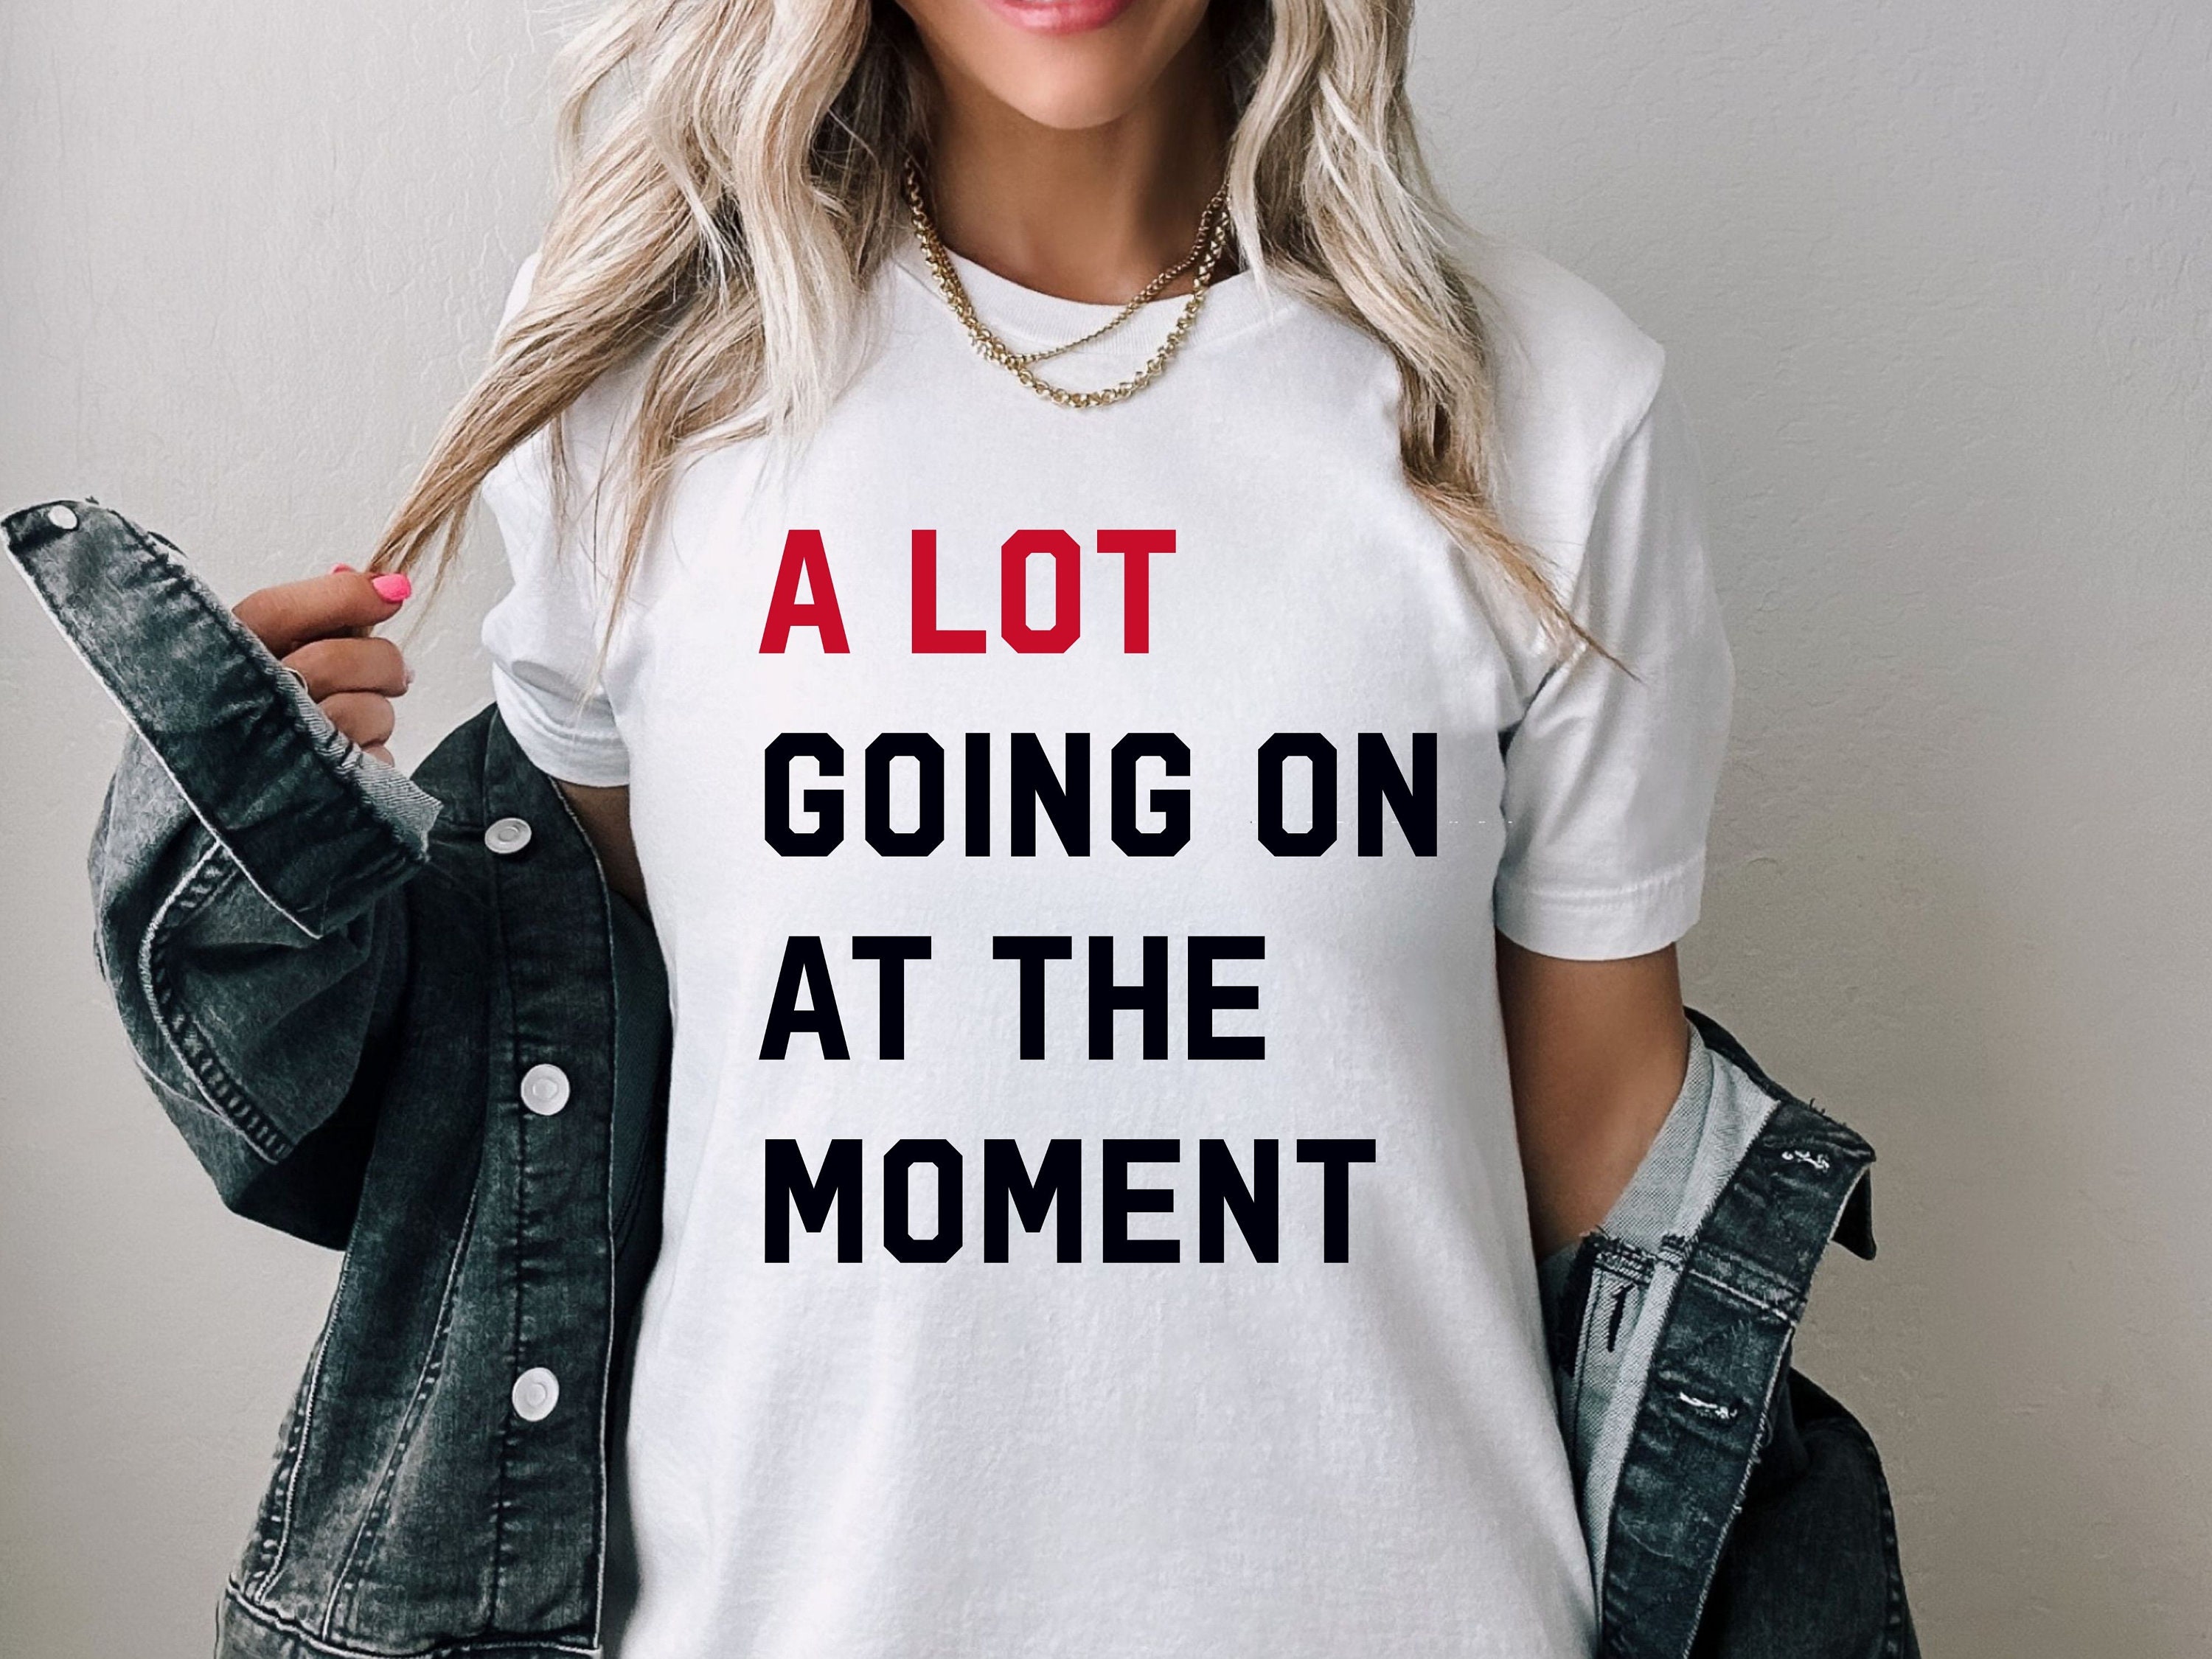 Not A Lot Going On at The Moment Shirt Women's Country Music T-Shirt  Nashville Country Concert Outfits for Women Pink